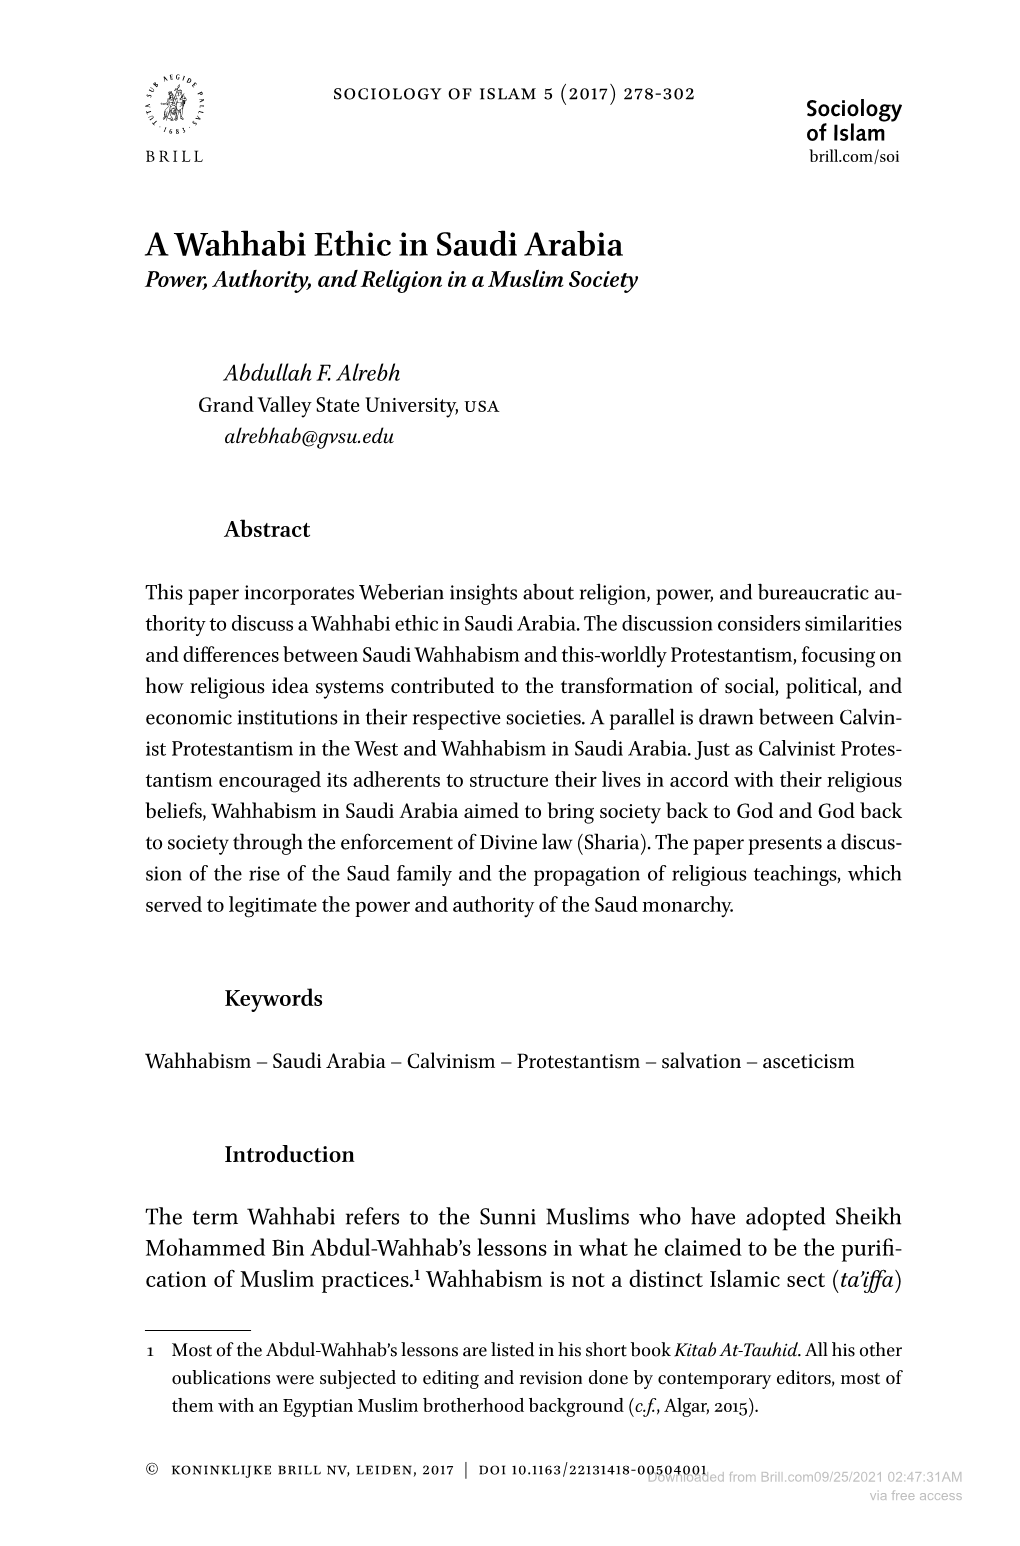 A Wahhabi Ethic in Saudi Arabia Power, Authority, and Religion in a Muslim Society